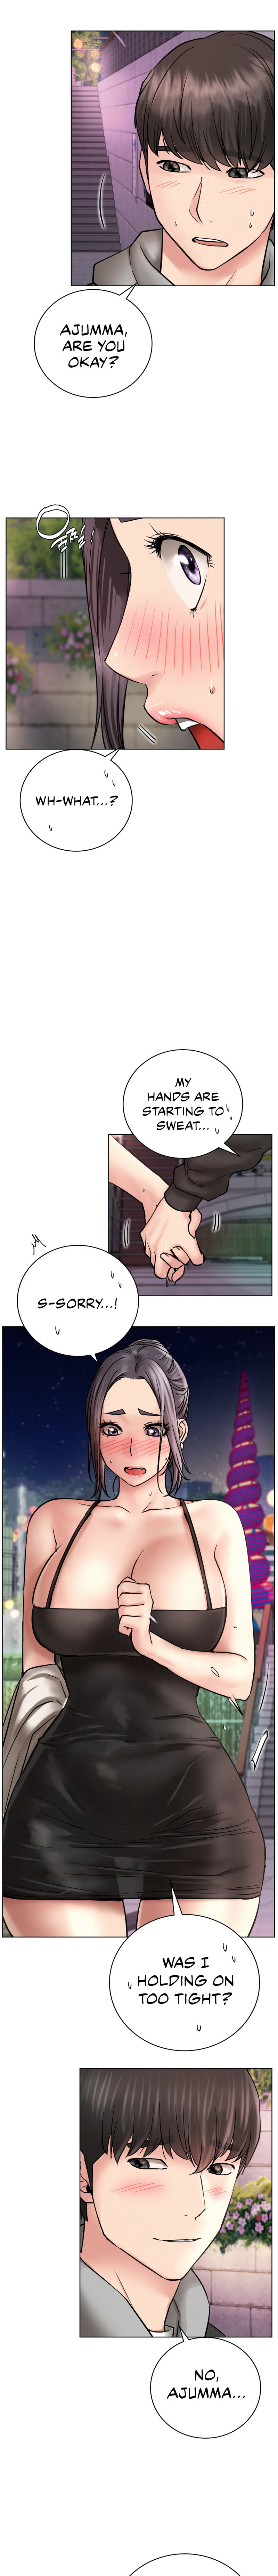 Staying with Ajumma - Chapter 57 Page 4